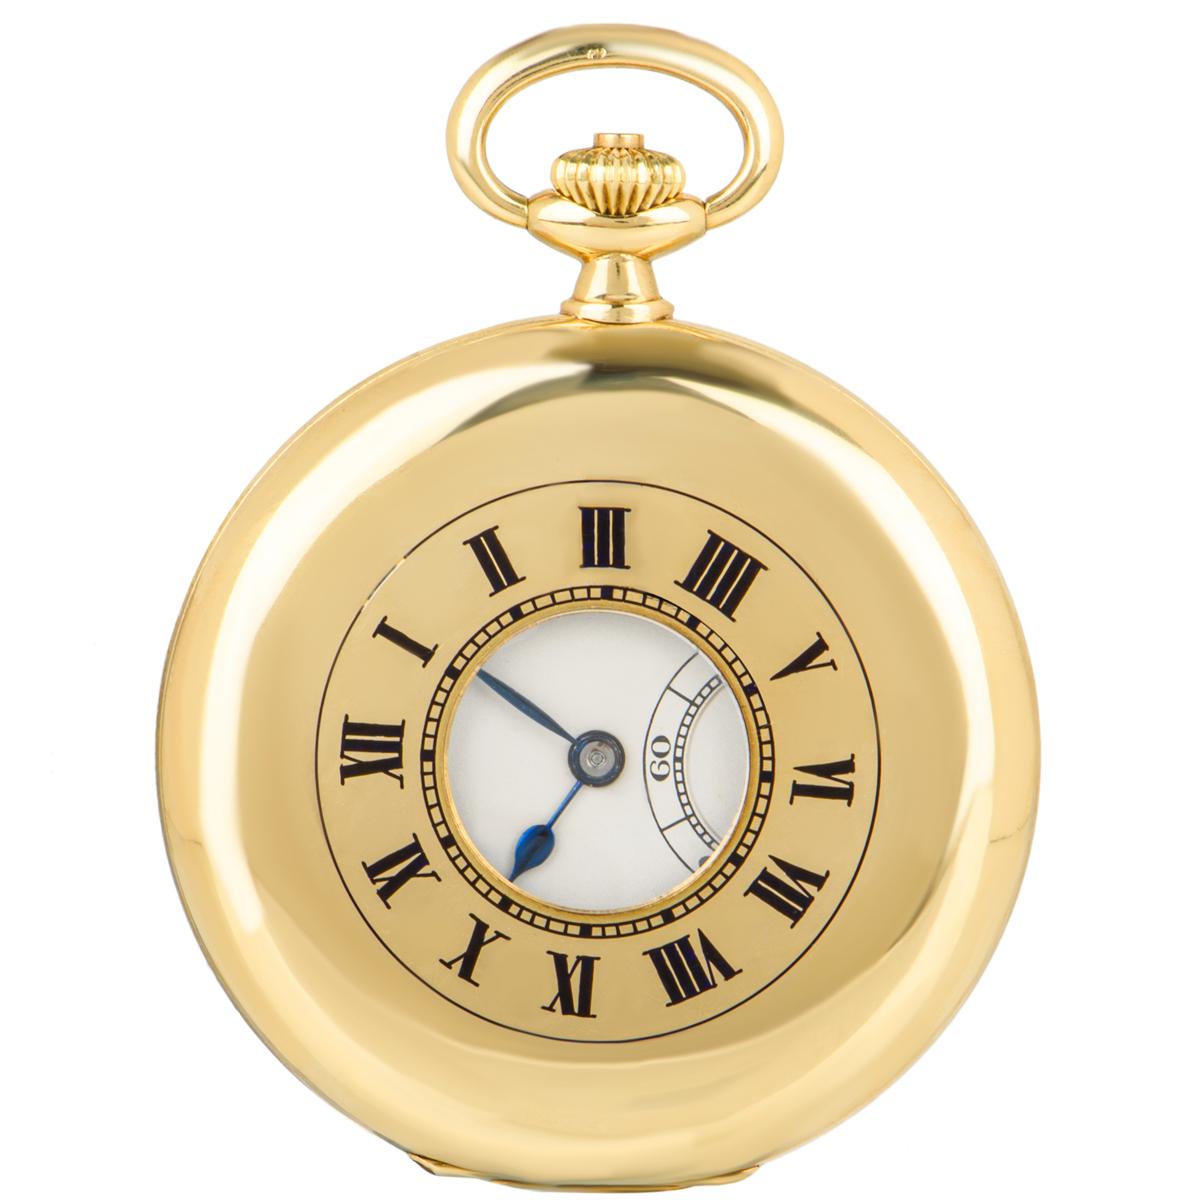 Longines 18ct yellow gold keyless lever slim half hunter pocket watch retailed by Mappin & Webb with a matching 18ct yellow gold chain and original presentation box, C1930s.

Dial: The silver Roman Numeral Dial with outer minute track and subsidiary